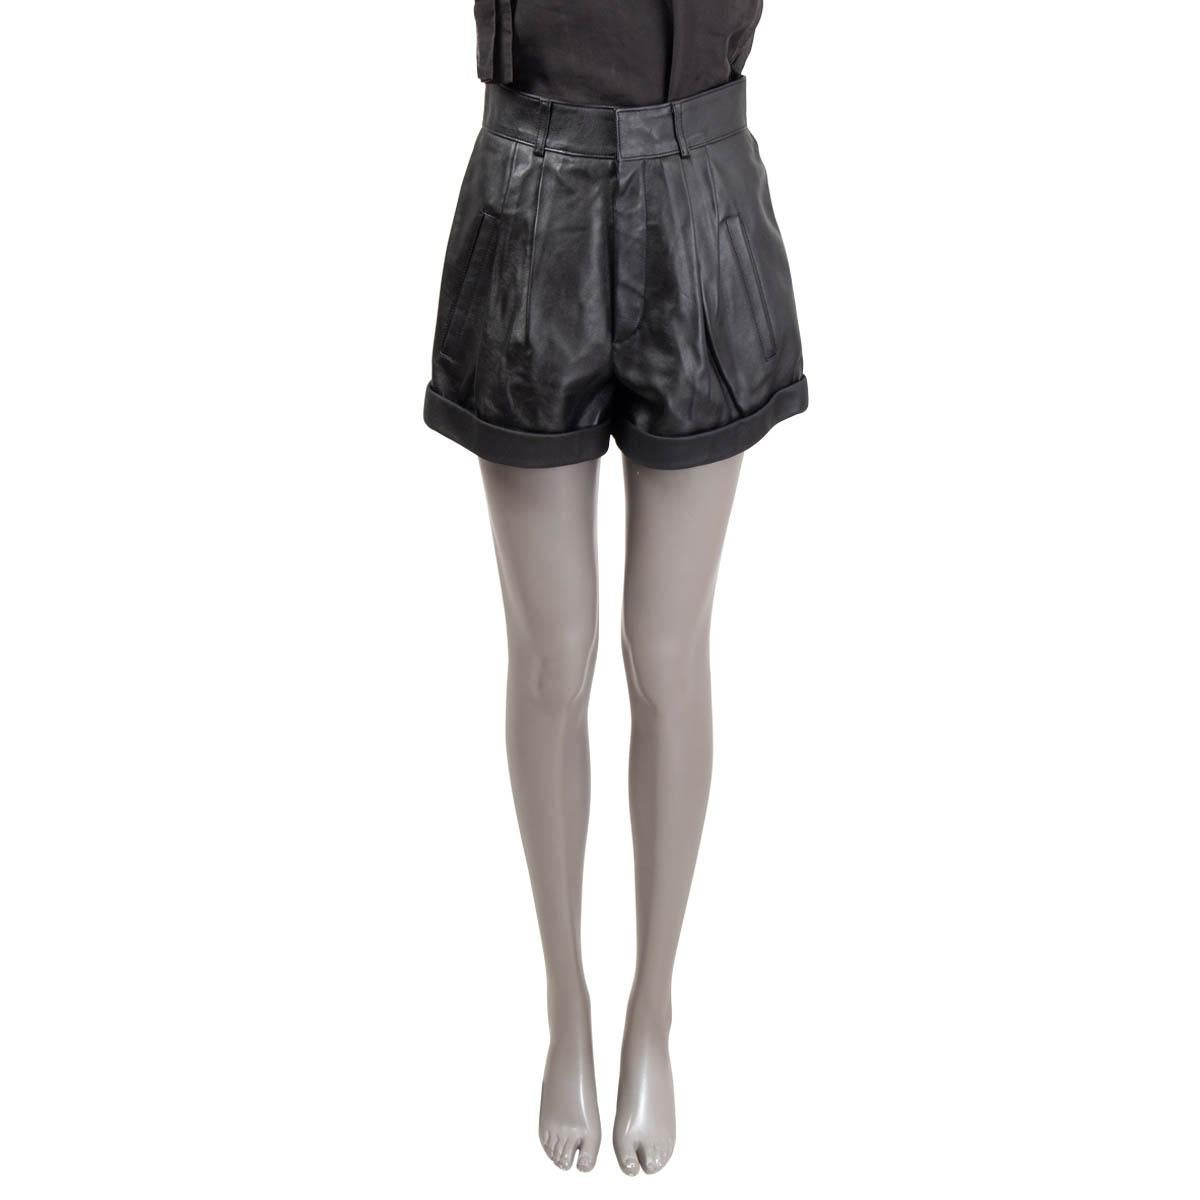 100% authentic Saint Laurent high waisted shorts in black leather (100%). Feature belt loops, two slit pockets. Open with push-button and a zipper on the front. Lined in silk (100%). Has been worn and is in excellent condition.

Measurements
Tag